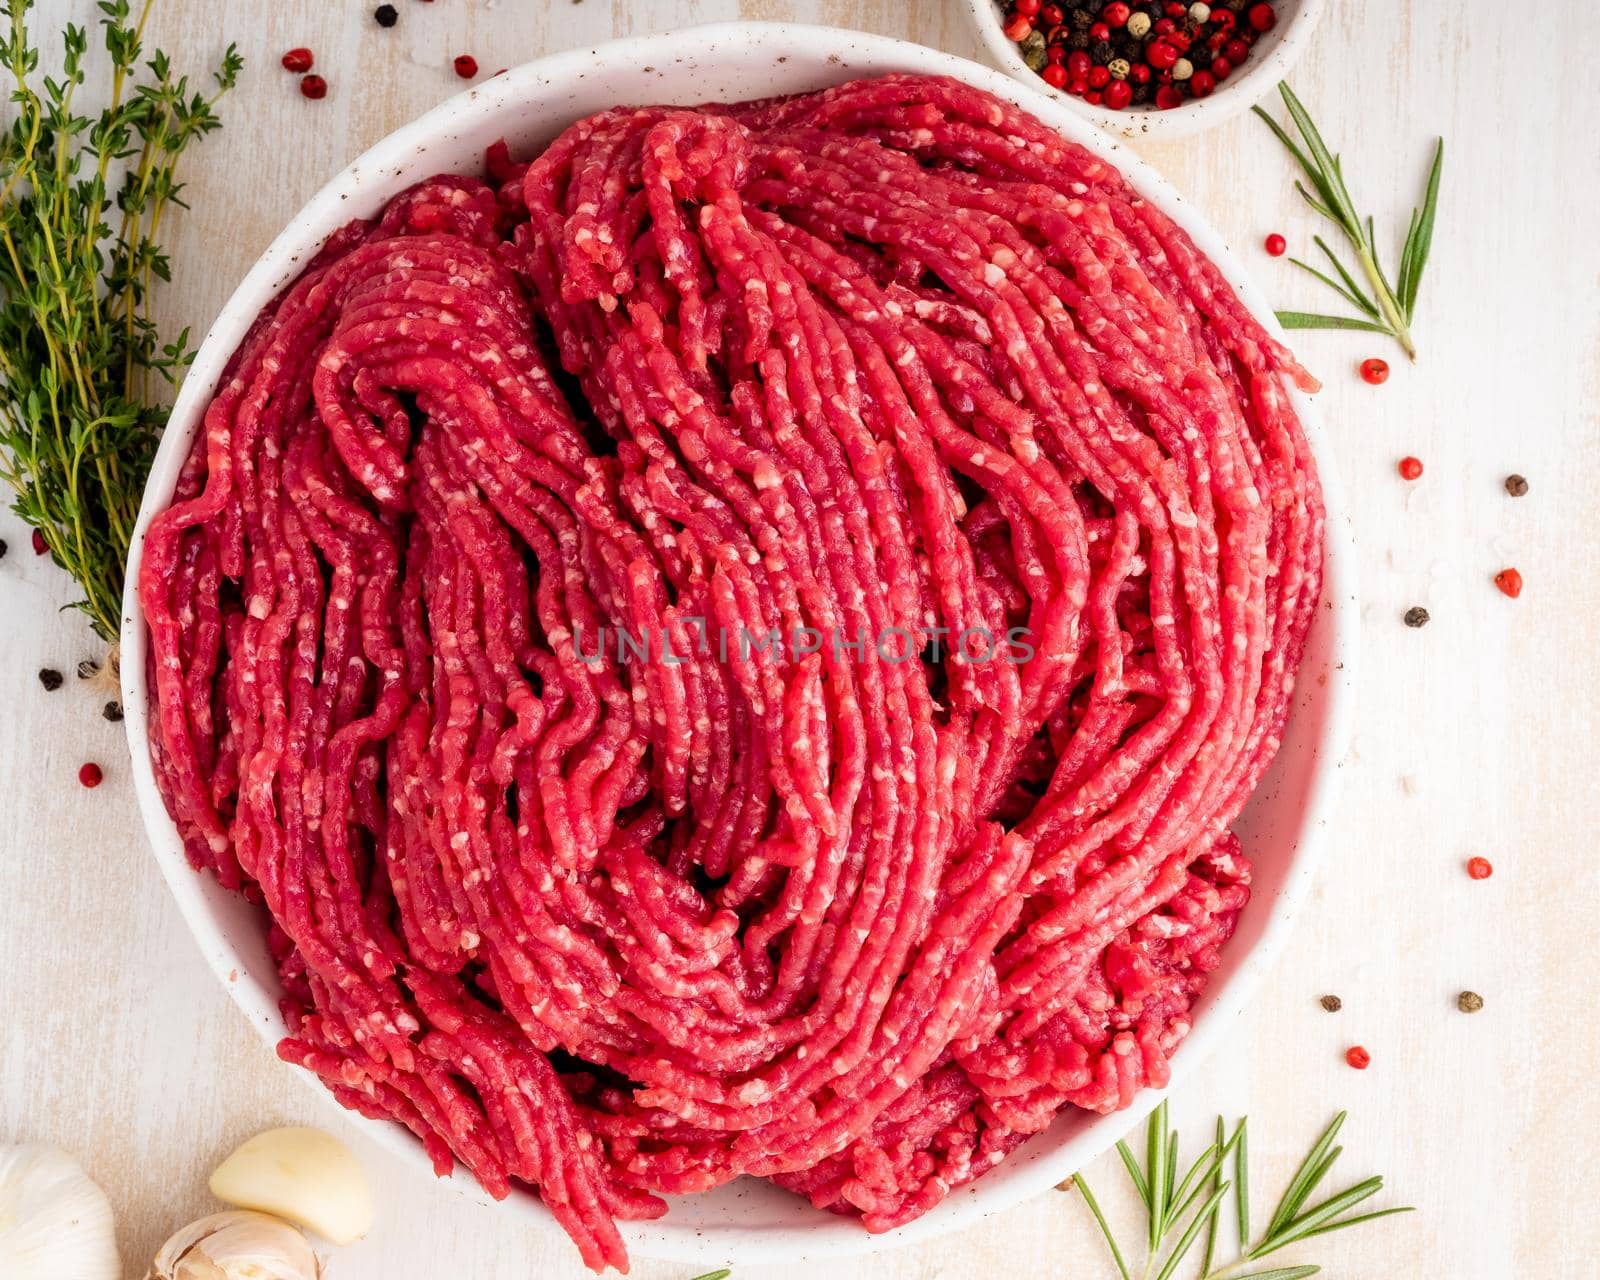 Mince beef, ground meat with ingredients for cooking on dark blue by NataBene